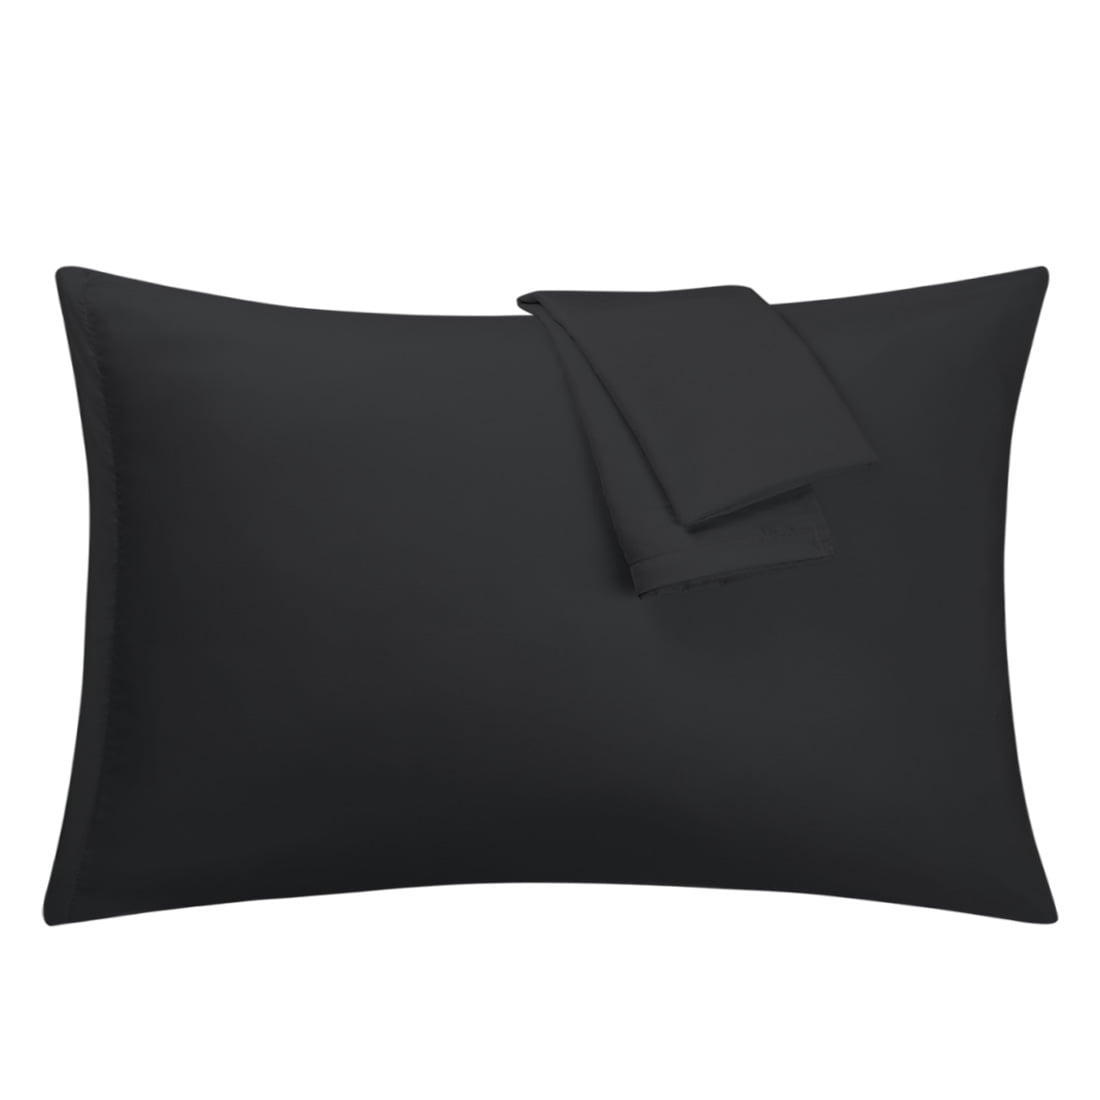 Queen,20"x30" Details about   Luxury 1800 Series 4pc Set of Pillowcases Microfiber Silky Soft 